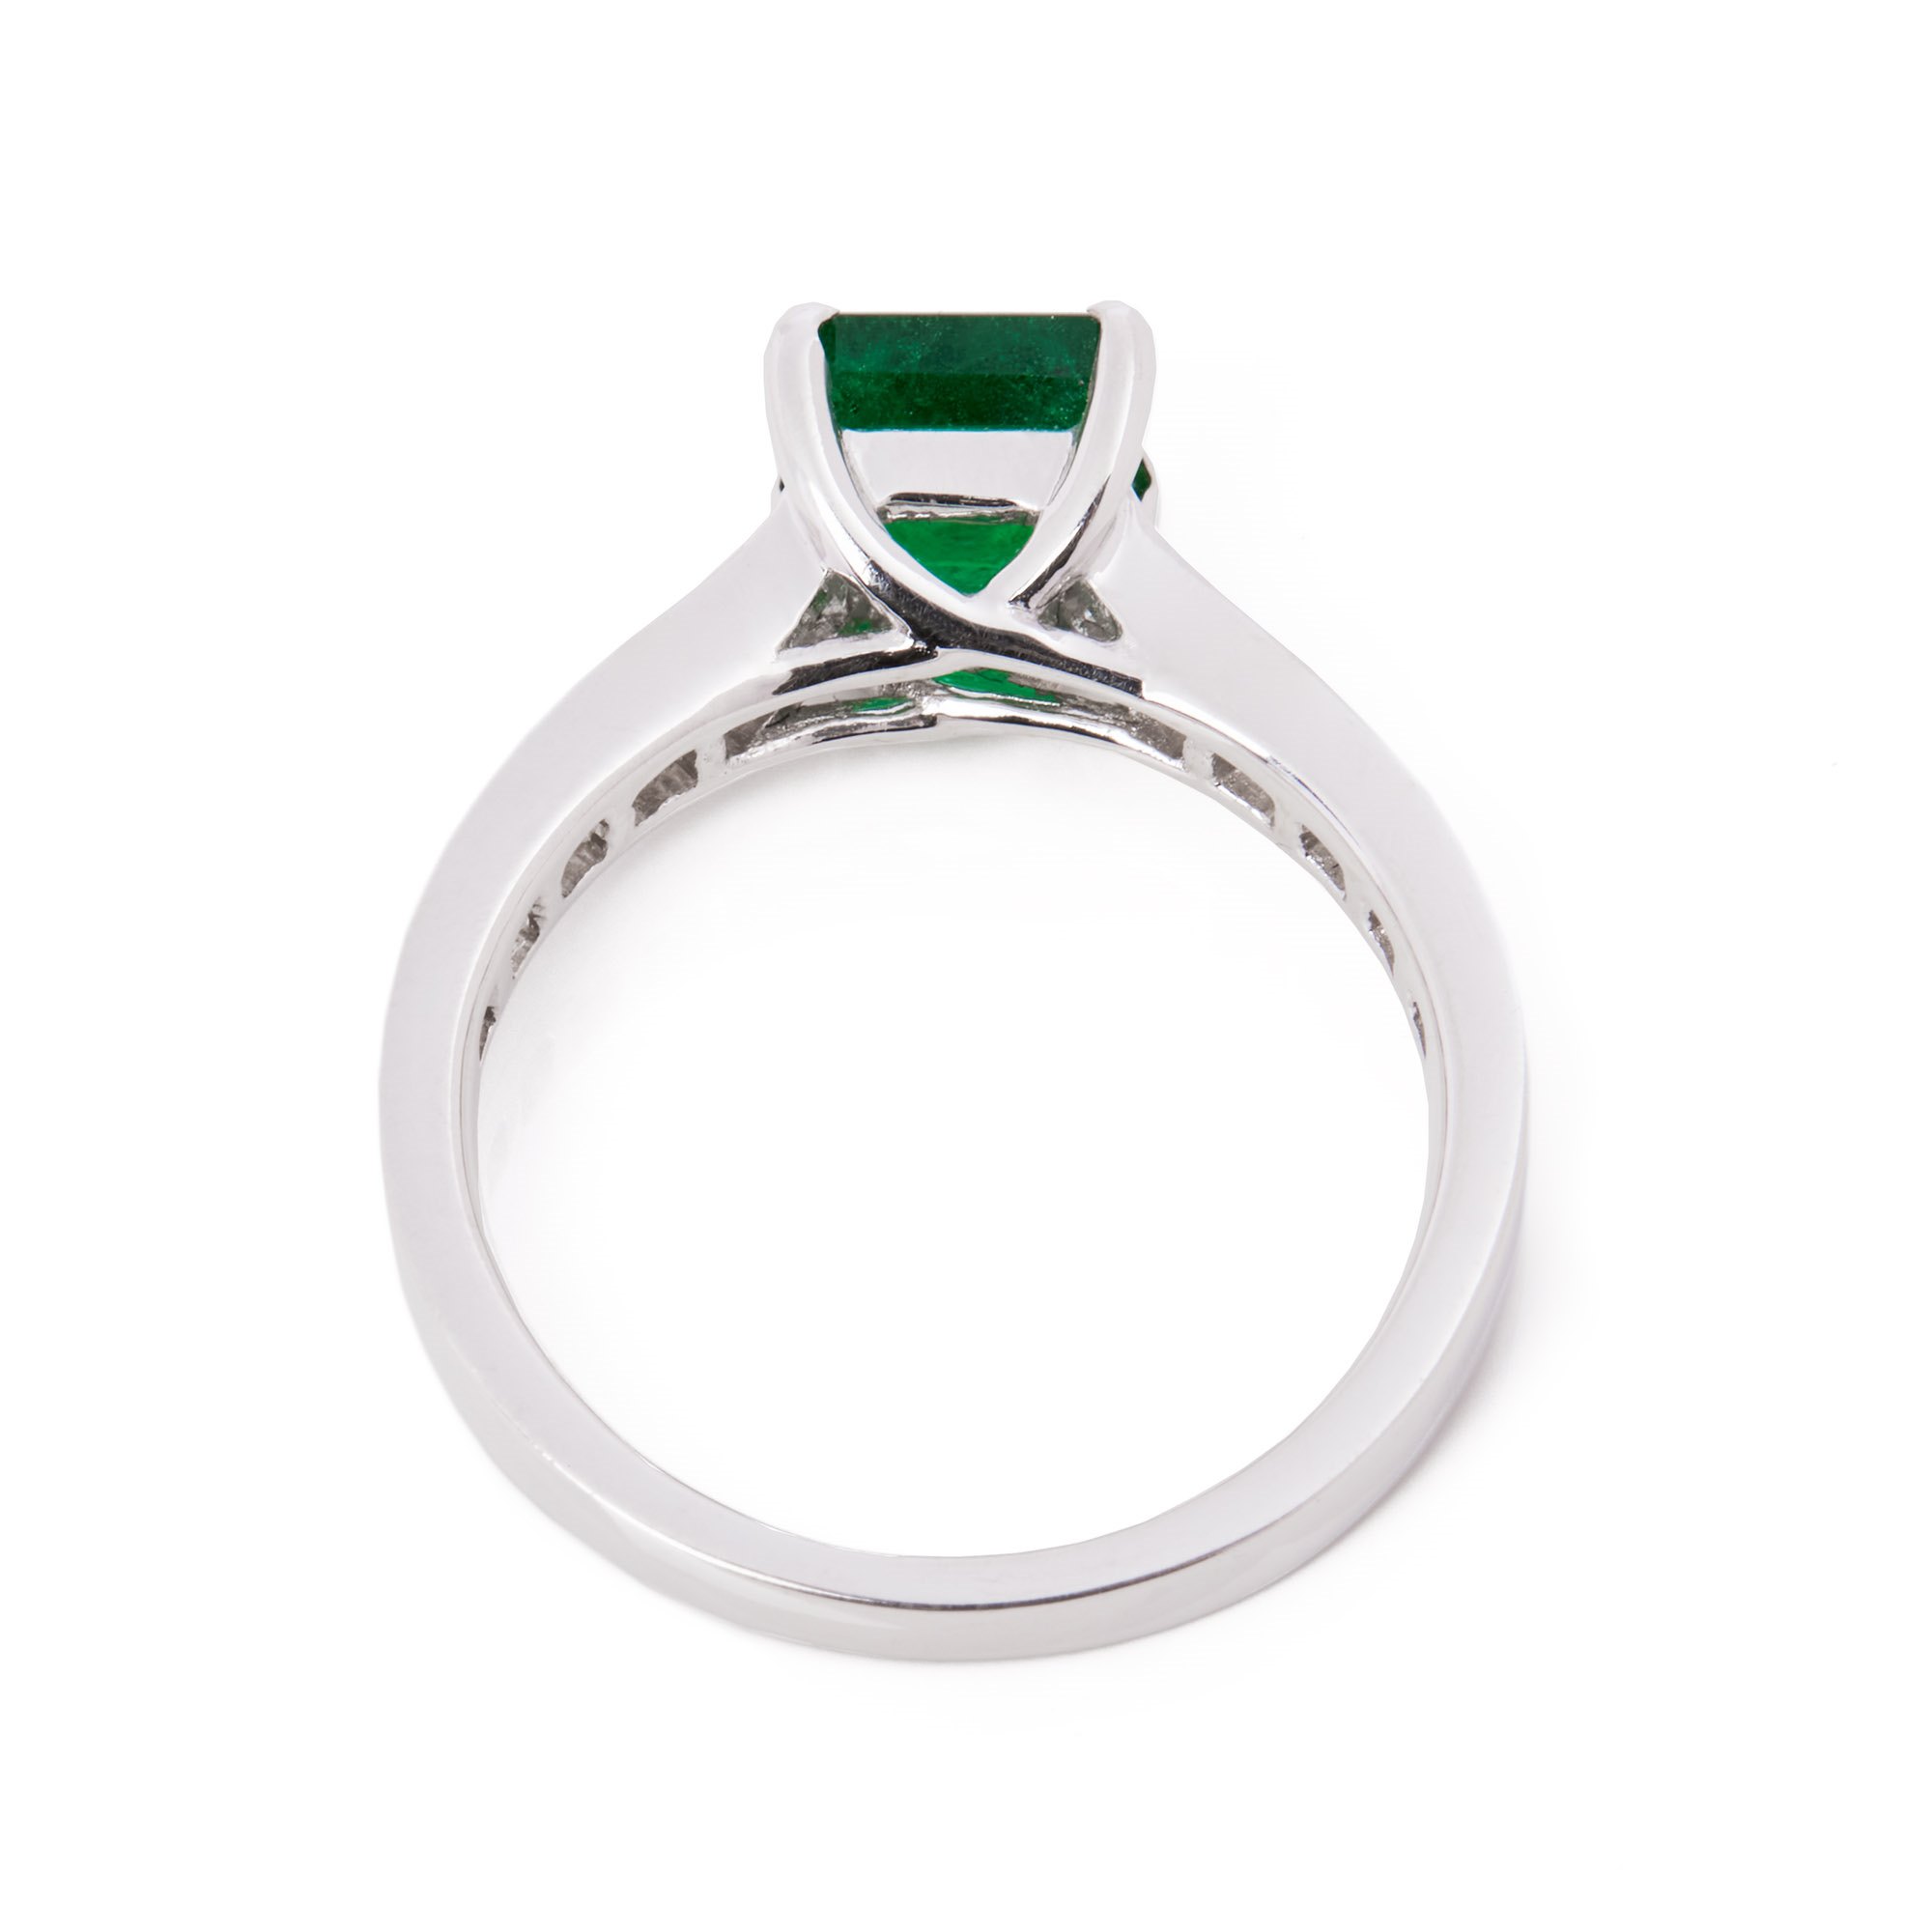 David Jerome Certified 1.15ct Square Cut Emerald and Diamond Ring